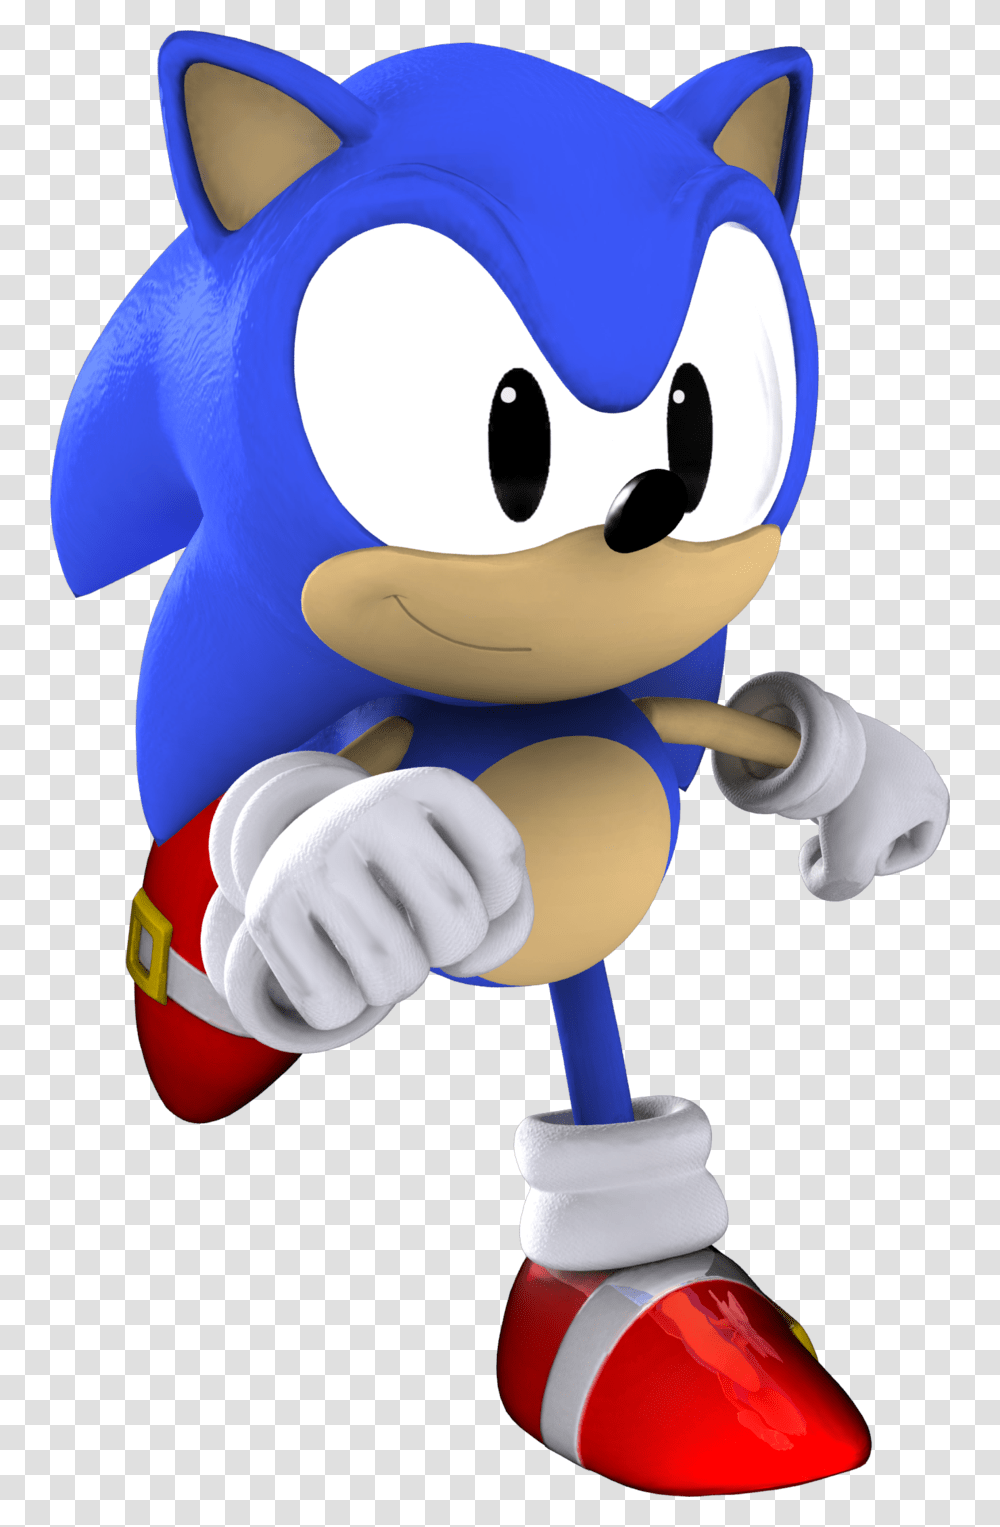 Classic Sonic The Hedgehog 3d By Itshelias94 Classic Sonic The Hedgehog 3d Render, Toy, Mascot, Hand Transparent Png